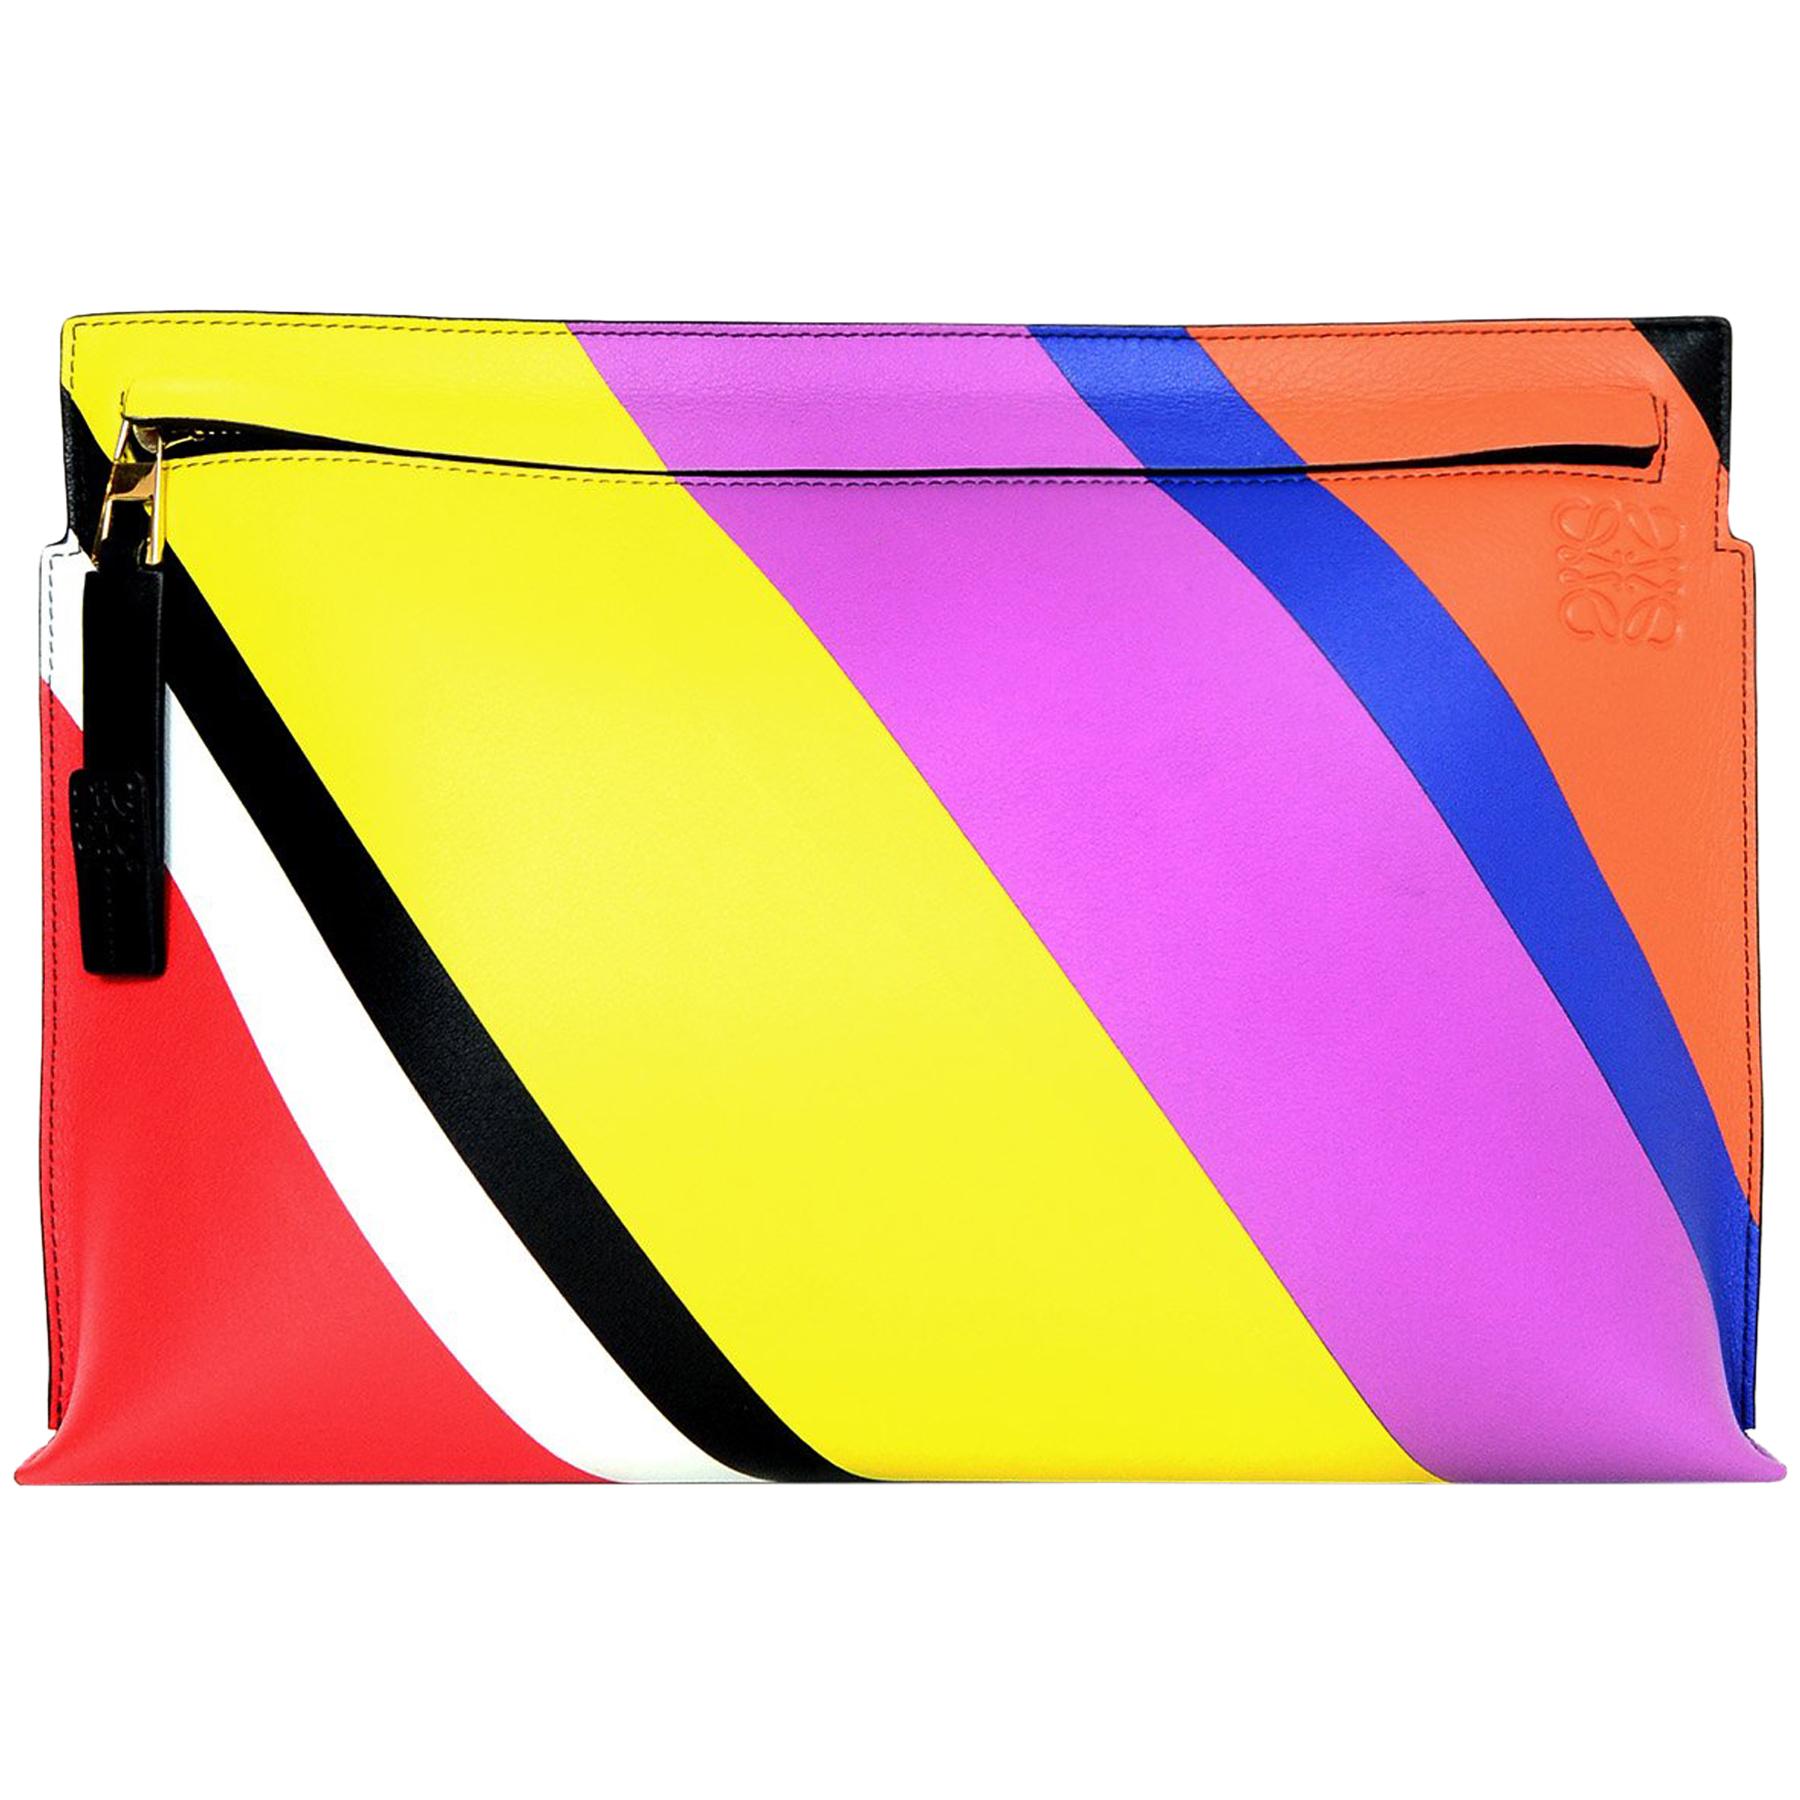 Loewe Multi-color Leather Stripe T-Pouch Flat Clutch Bag